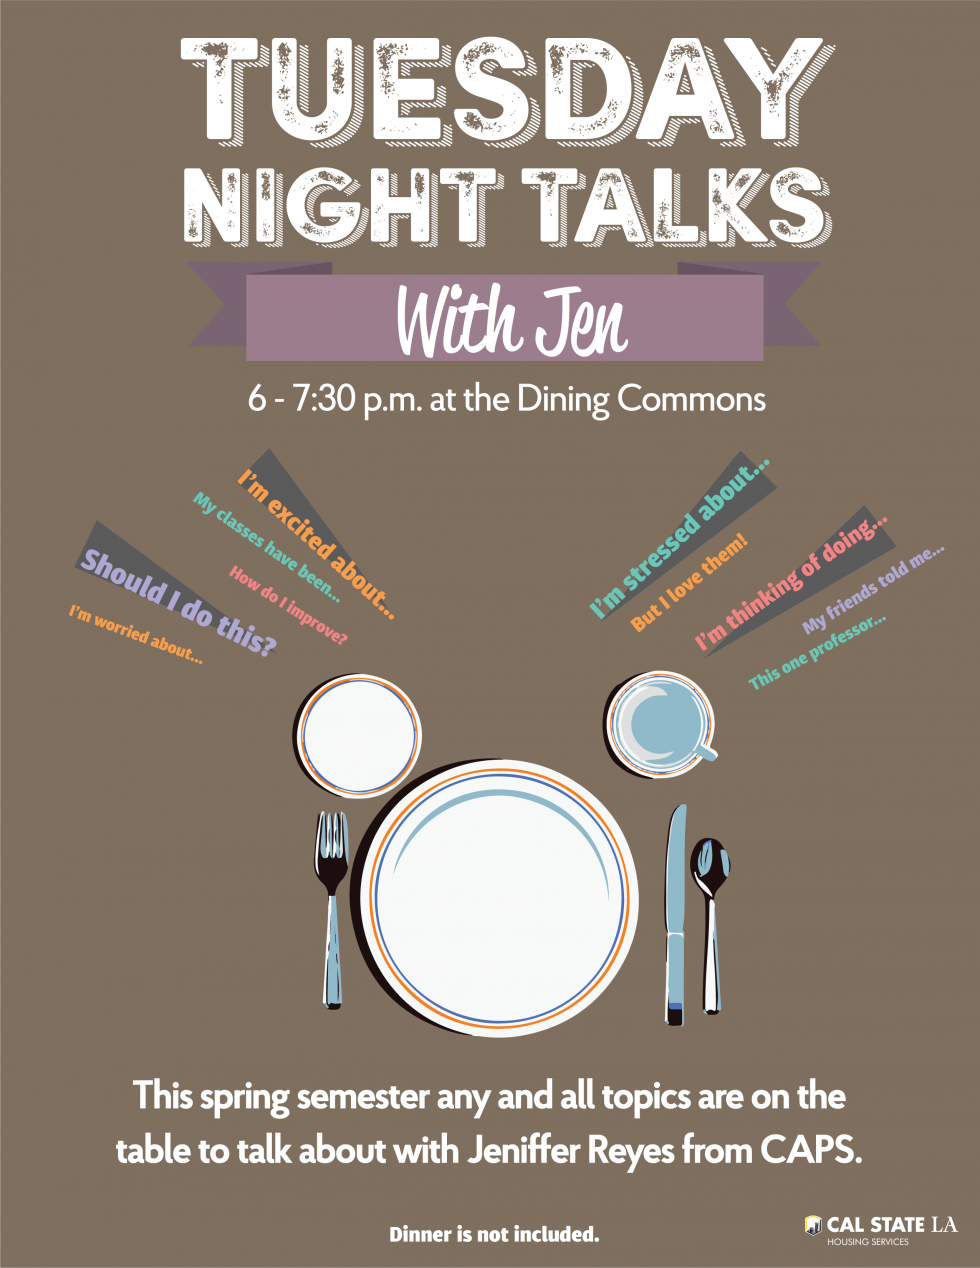 Tuesday Night Talks with Jen at the Dining Commons from 6 to 7:30 p.m.